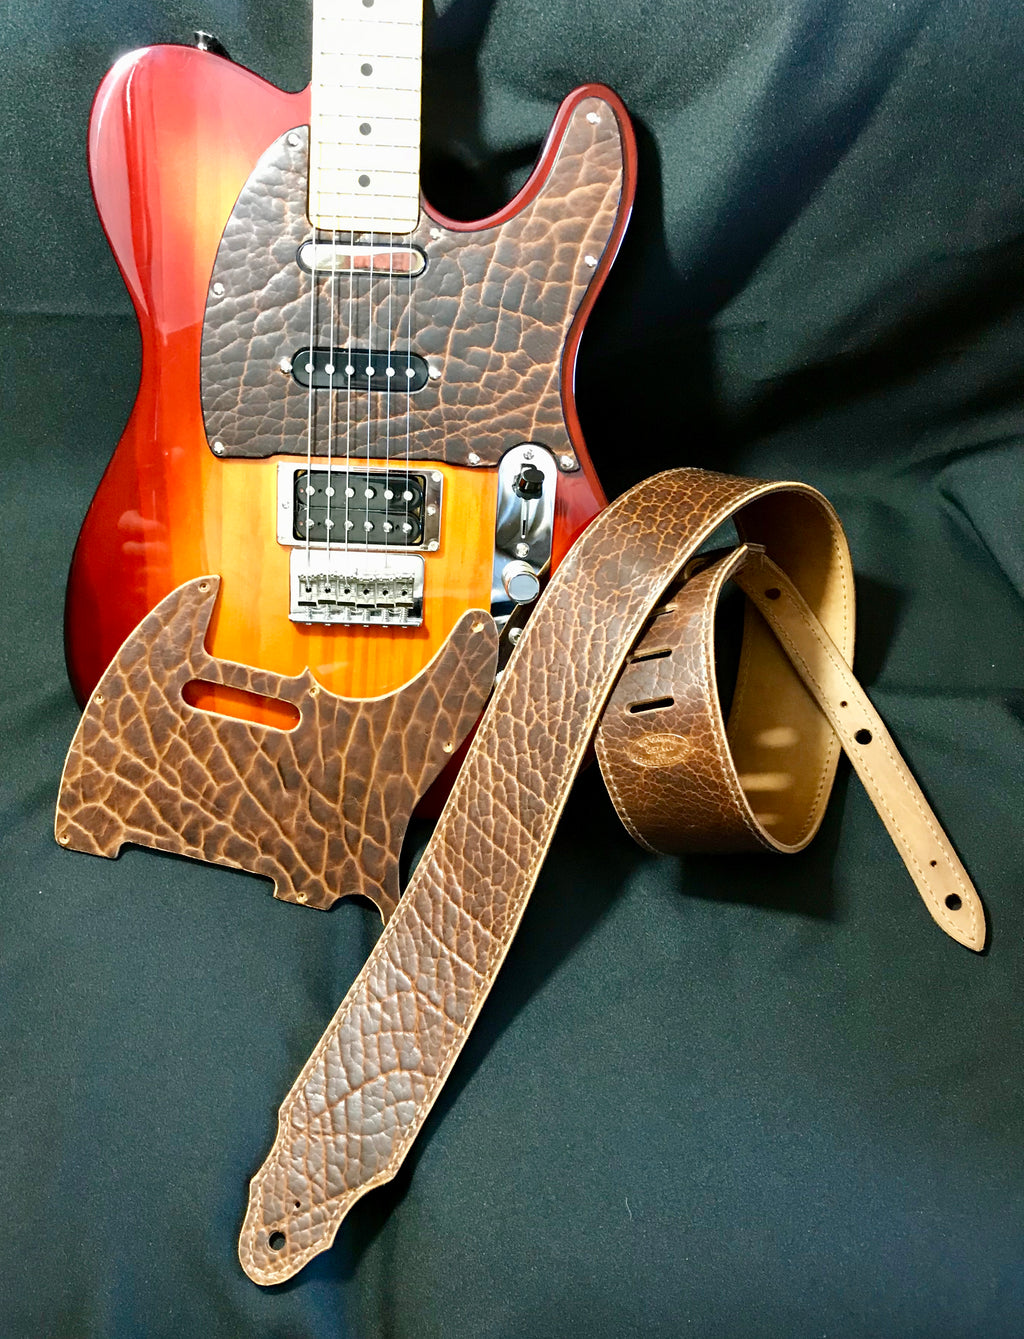 Guitar Strap and Telecaster Pickguard Set, American Bison Leather